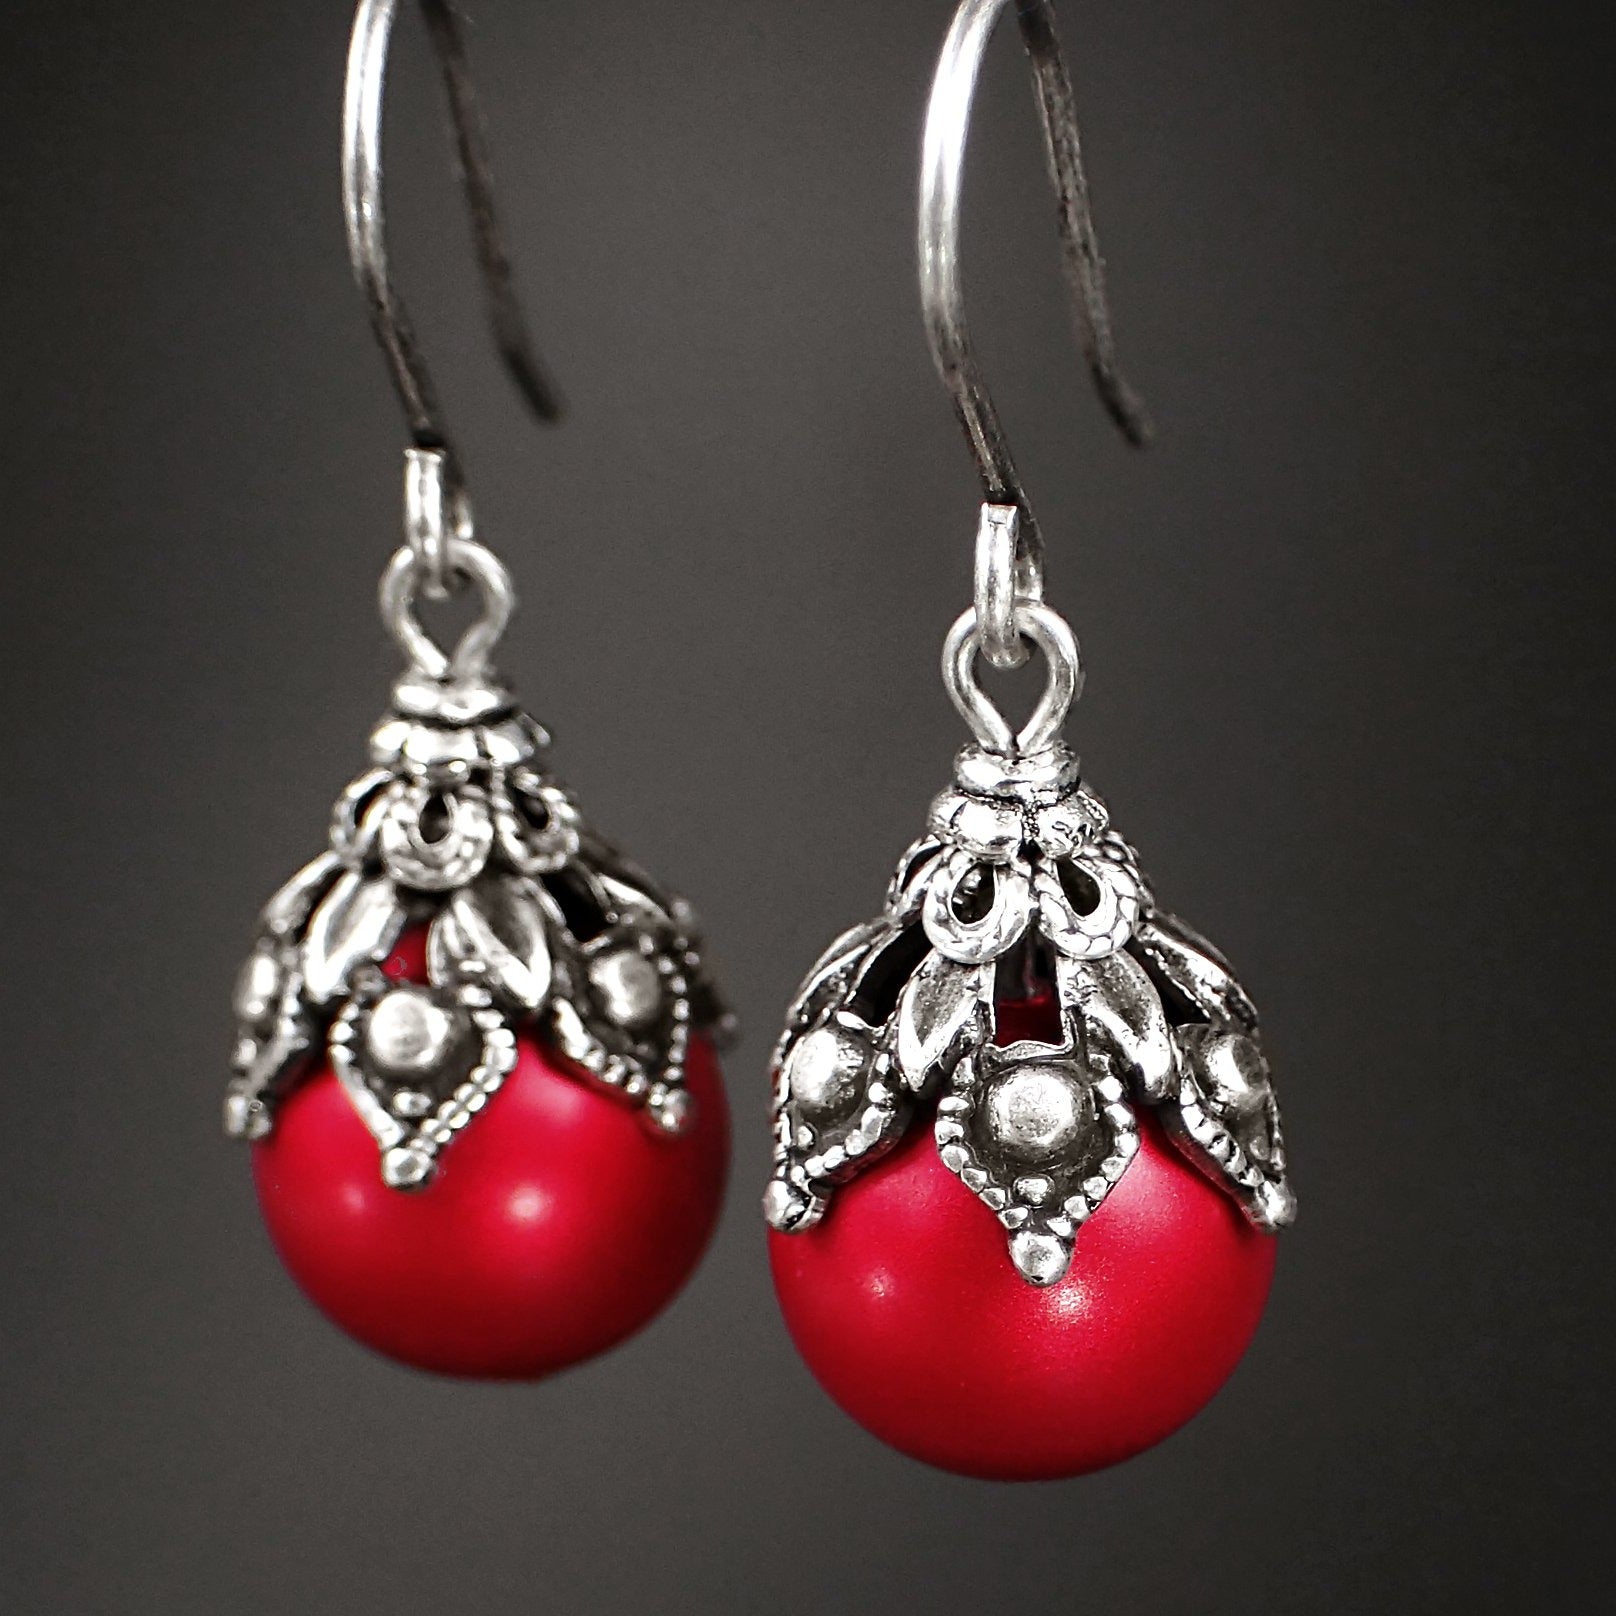 Antiqued silver filigree and adornments paired with Rouge crystal pearls, which are a soft, semi-matte, rich red hue.